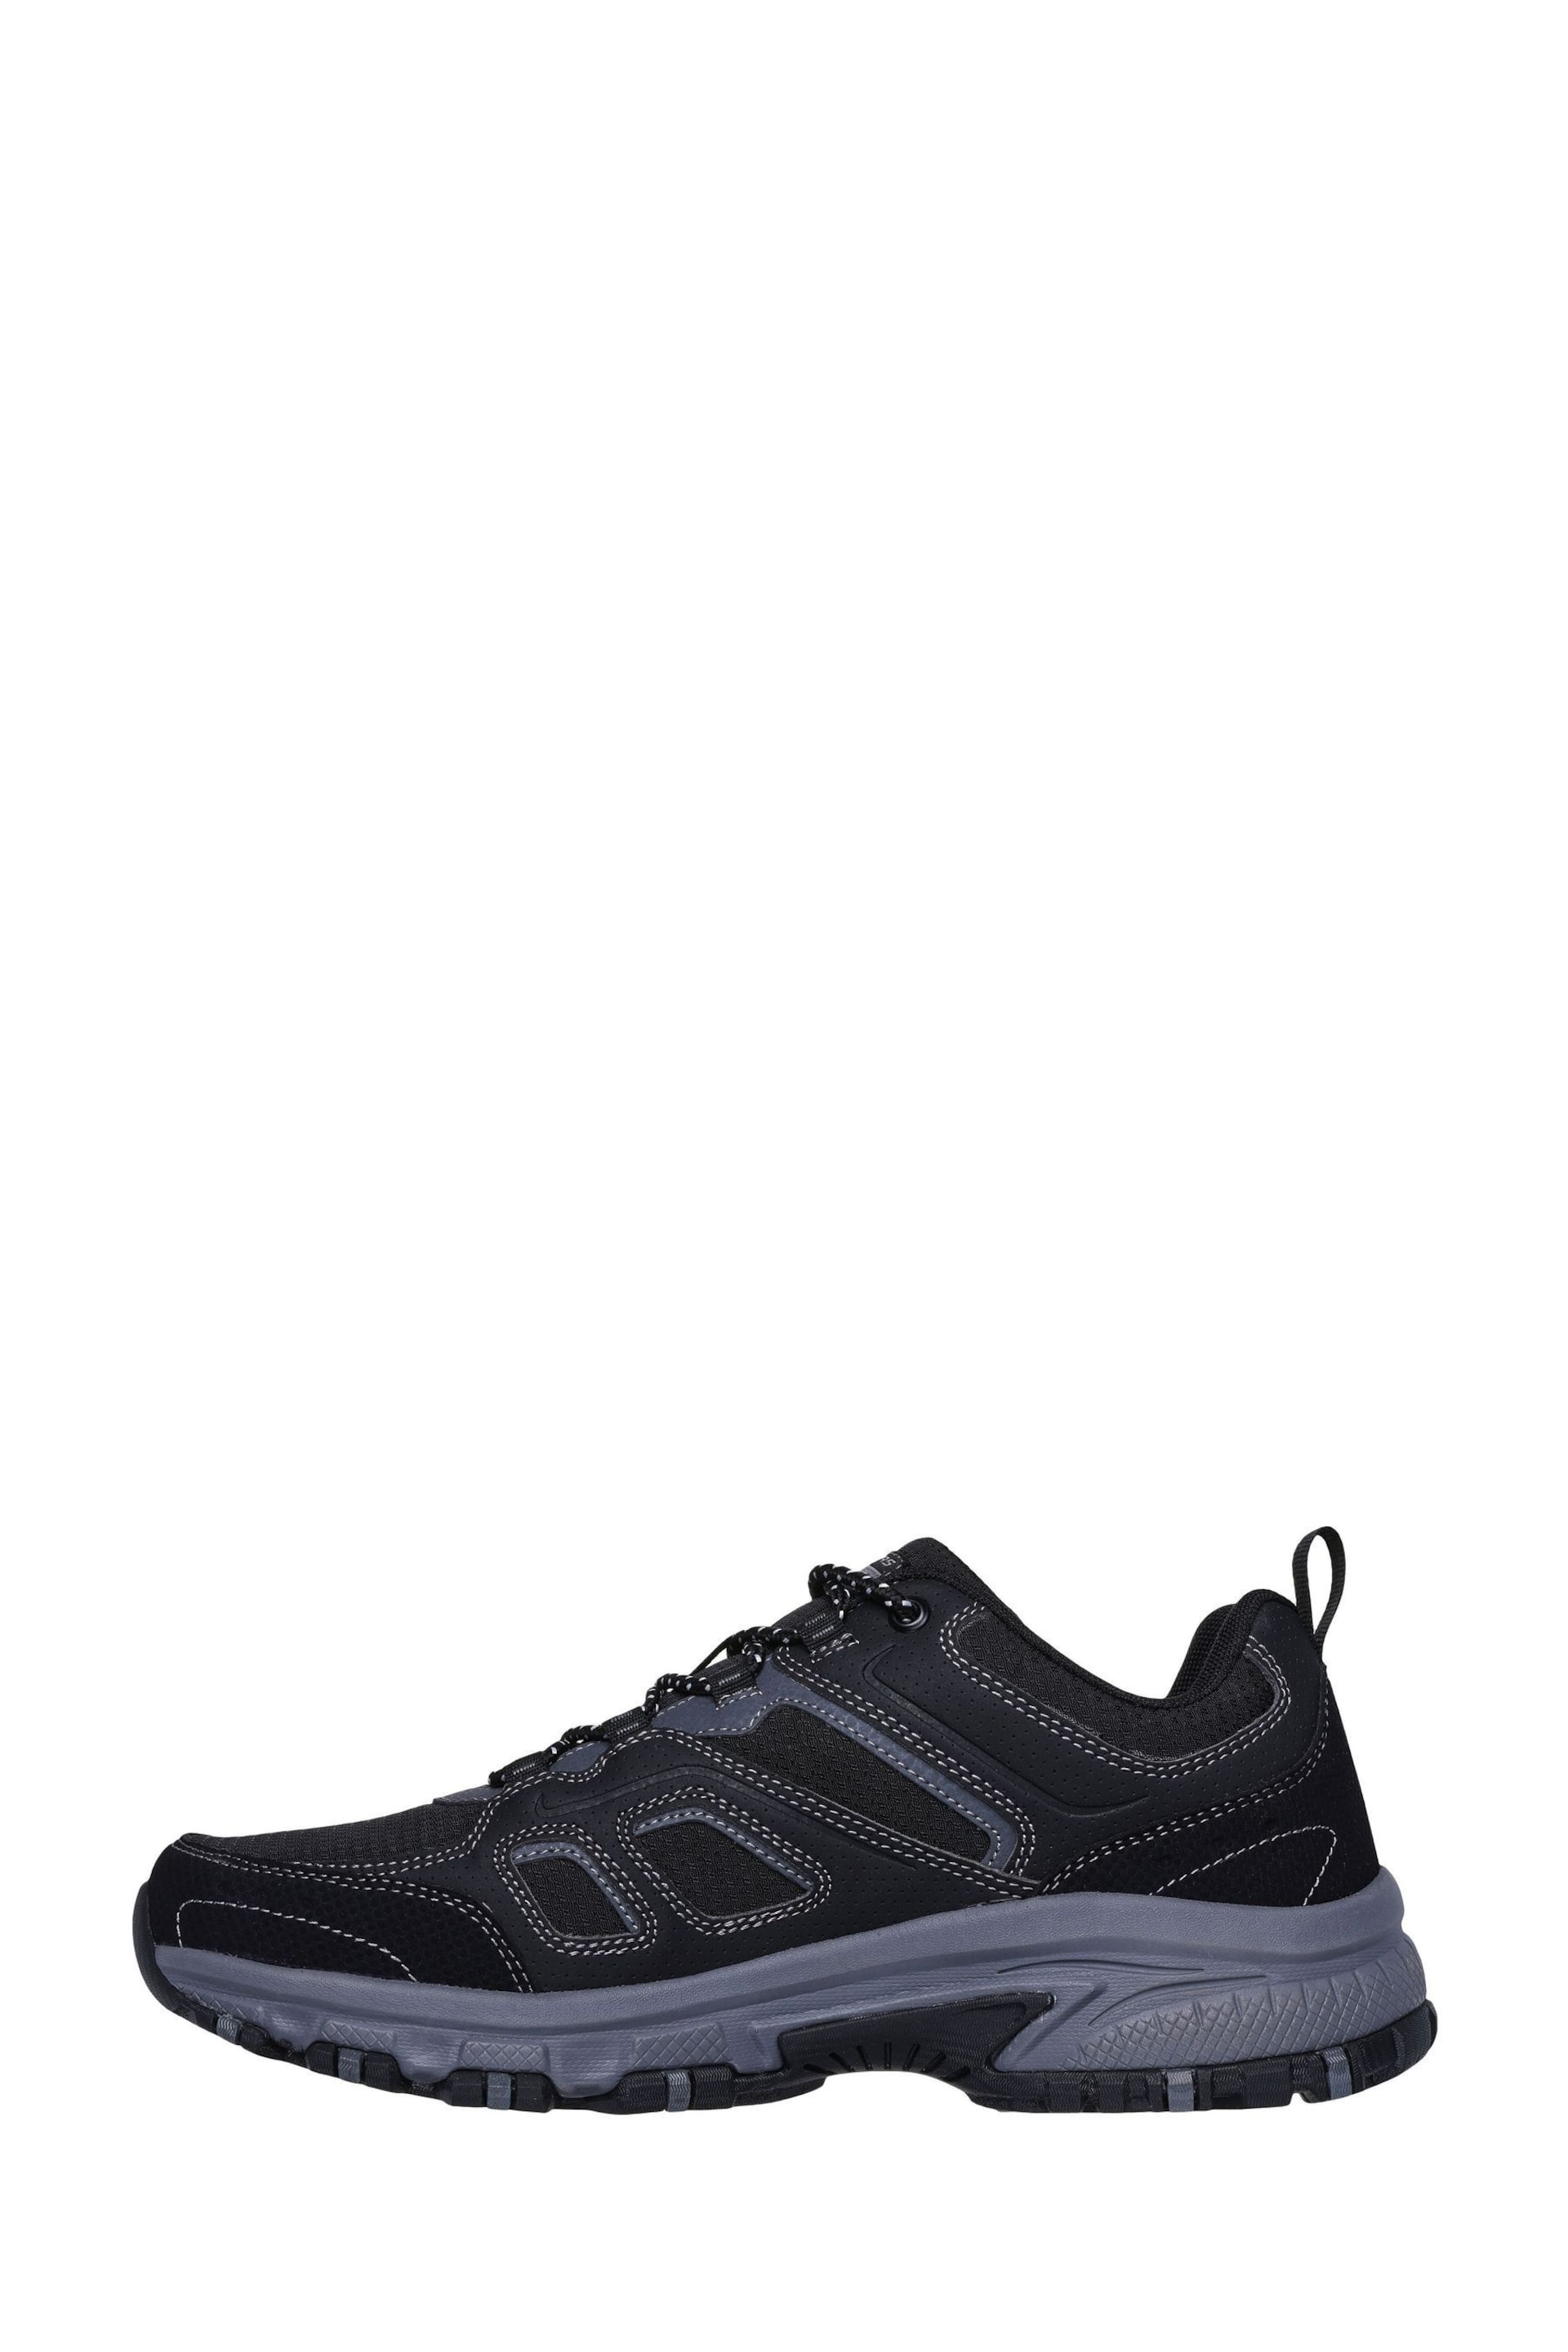 Skechers Black Mens Hillcrest Pure Escape Trail Running Trainers - Image 2 of 5